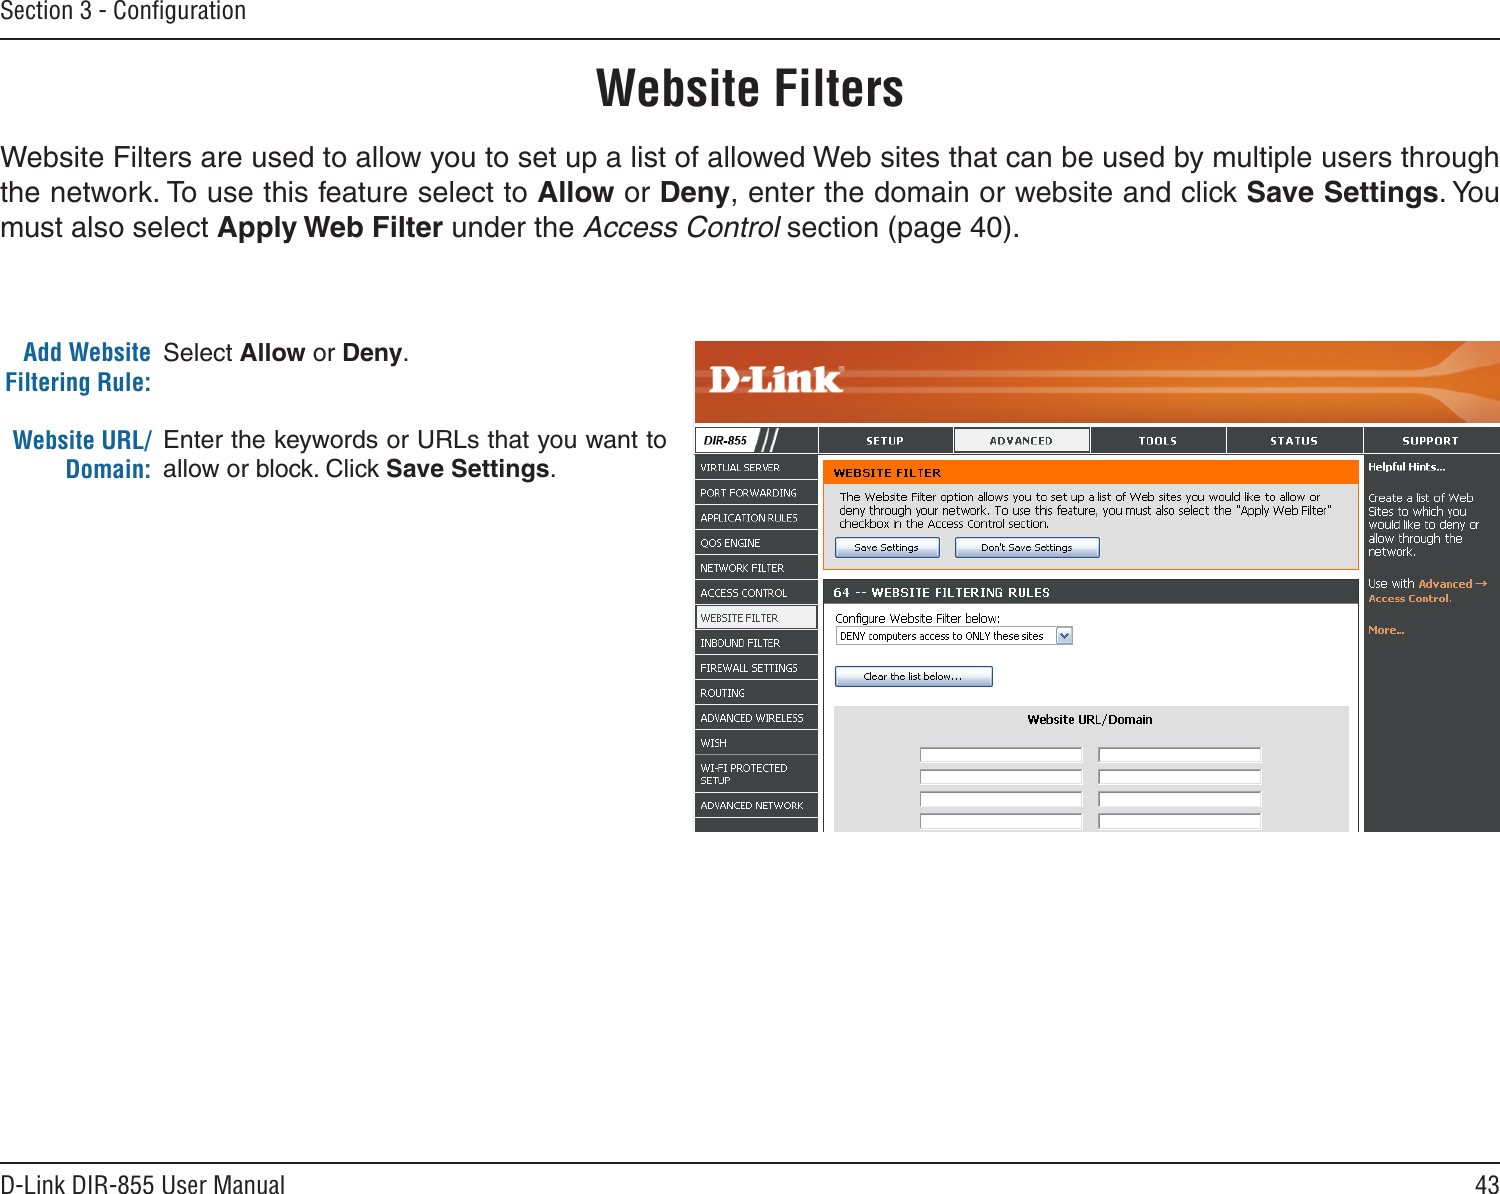 43D-Link DIR-855 User ManualSection 3 - ConﬁgurationAdd Website Filtering Rule:Website URL/Domain:Website FiltersSelect Allow or Deny.Enter the keywords or URLs that you want to allow or block. Click Save Settings.Website Filters are used to allow you to set up a list of allowed Web sites that can be used by multiple users through the network. To use this feature select to Allow or Deny, enter the domain or website and click Save Settings. You must also select Apply Web Filter under the Access Control section (page 40).